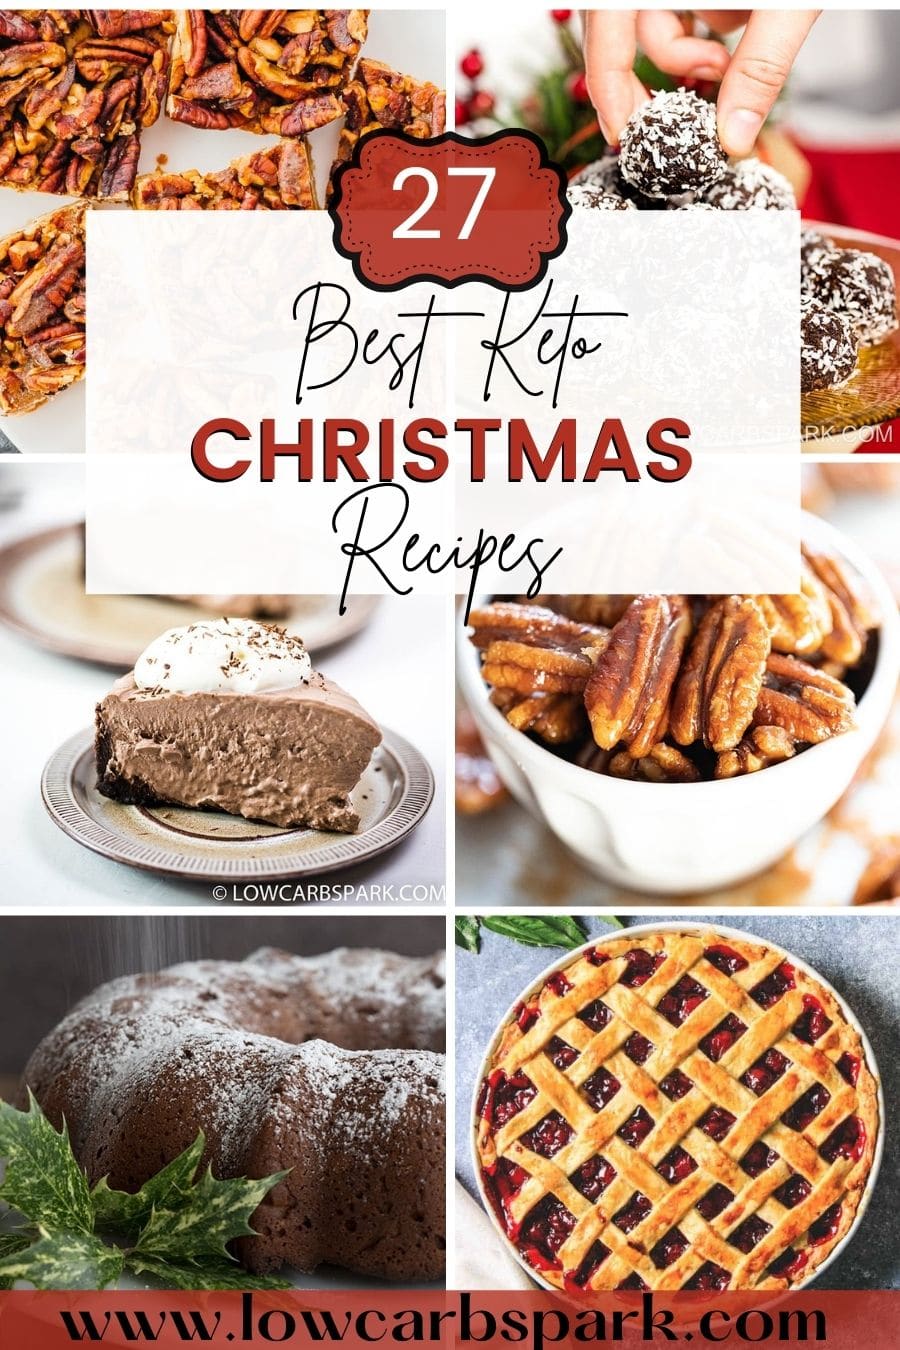 30+ Keto Christmas Desserts - Best Low Carb Deserts